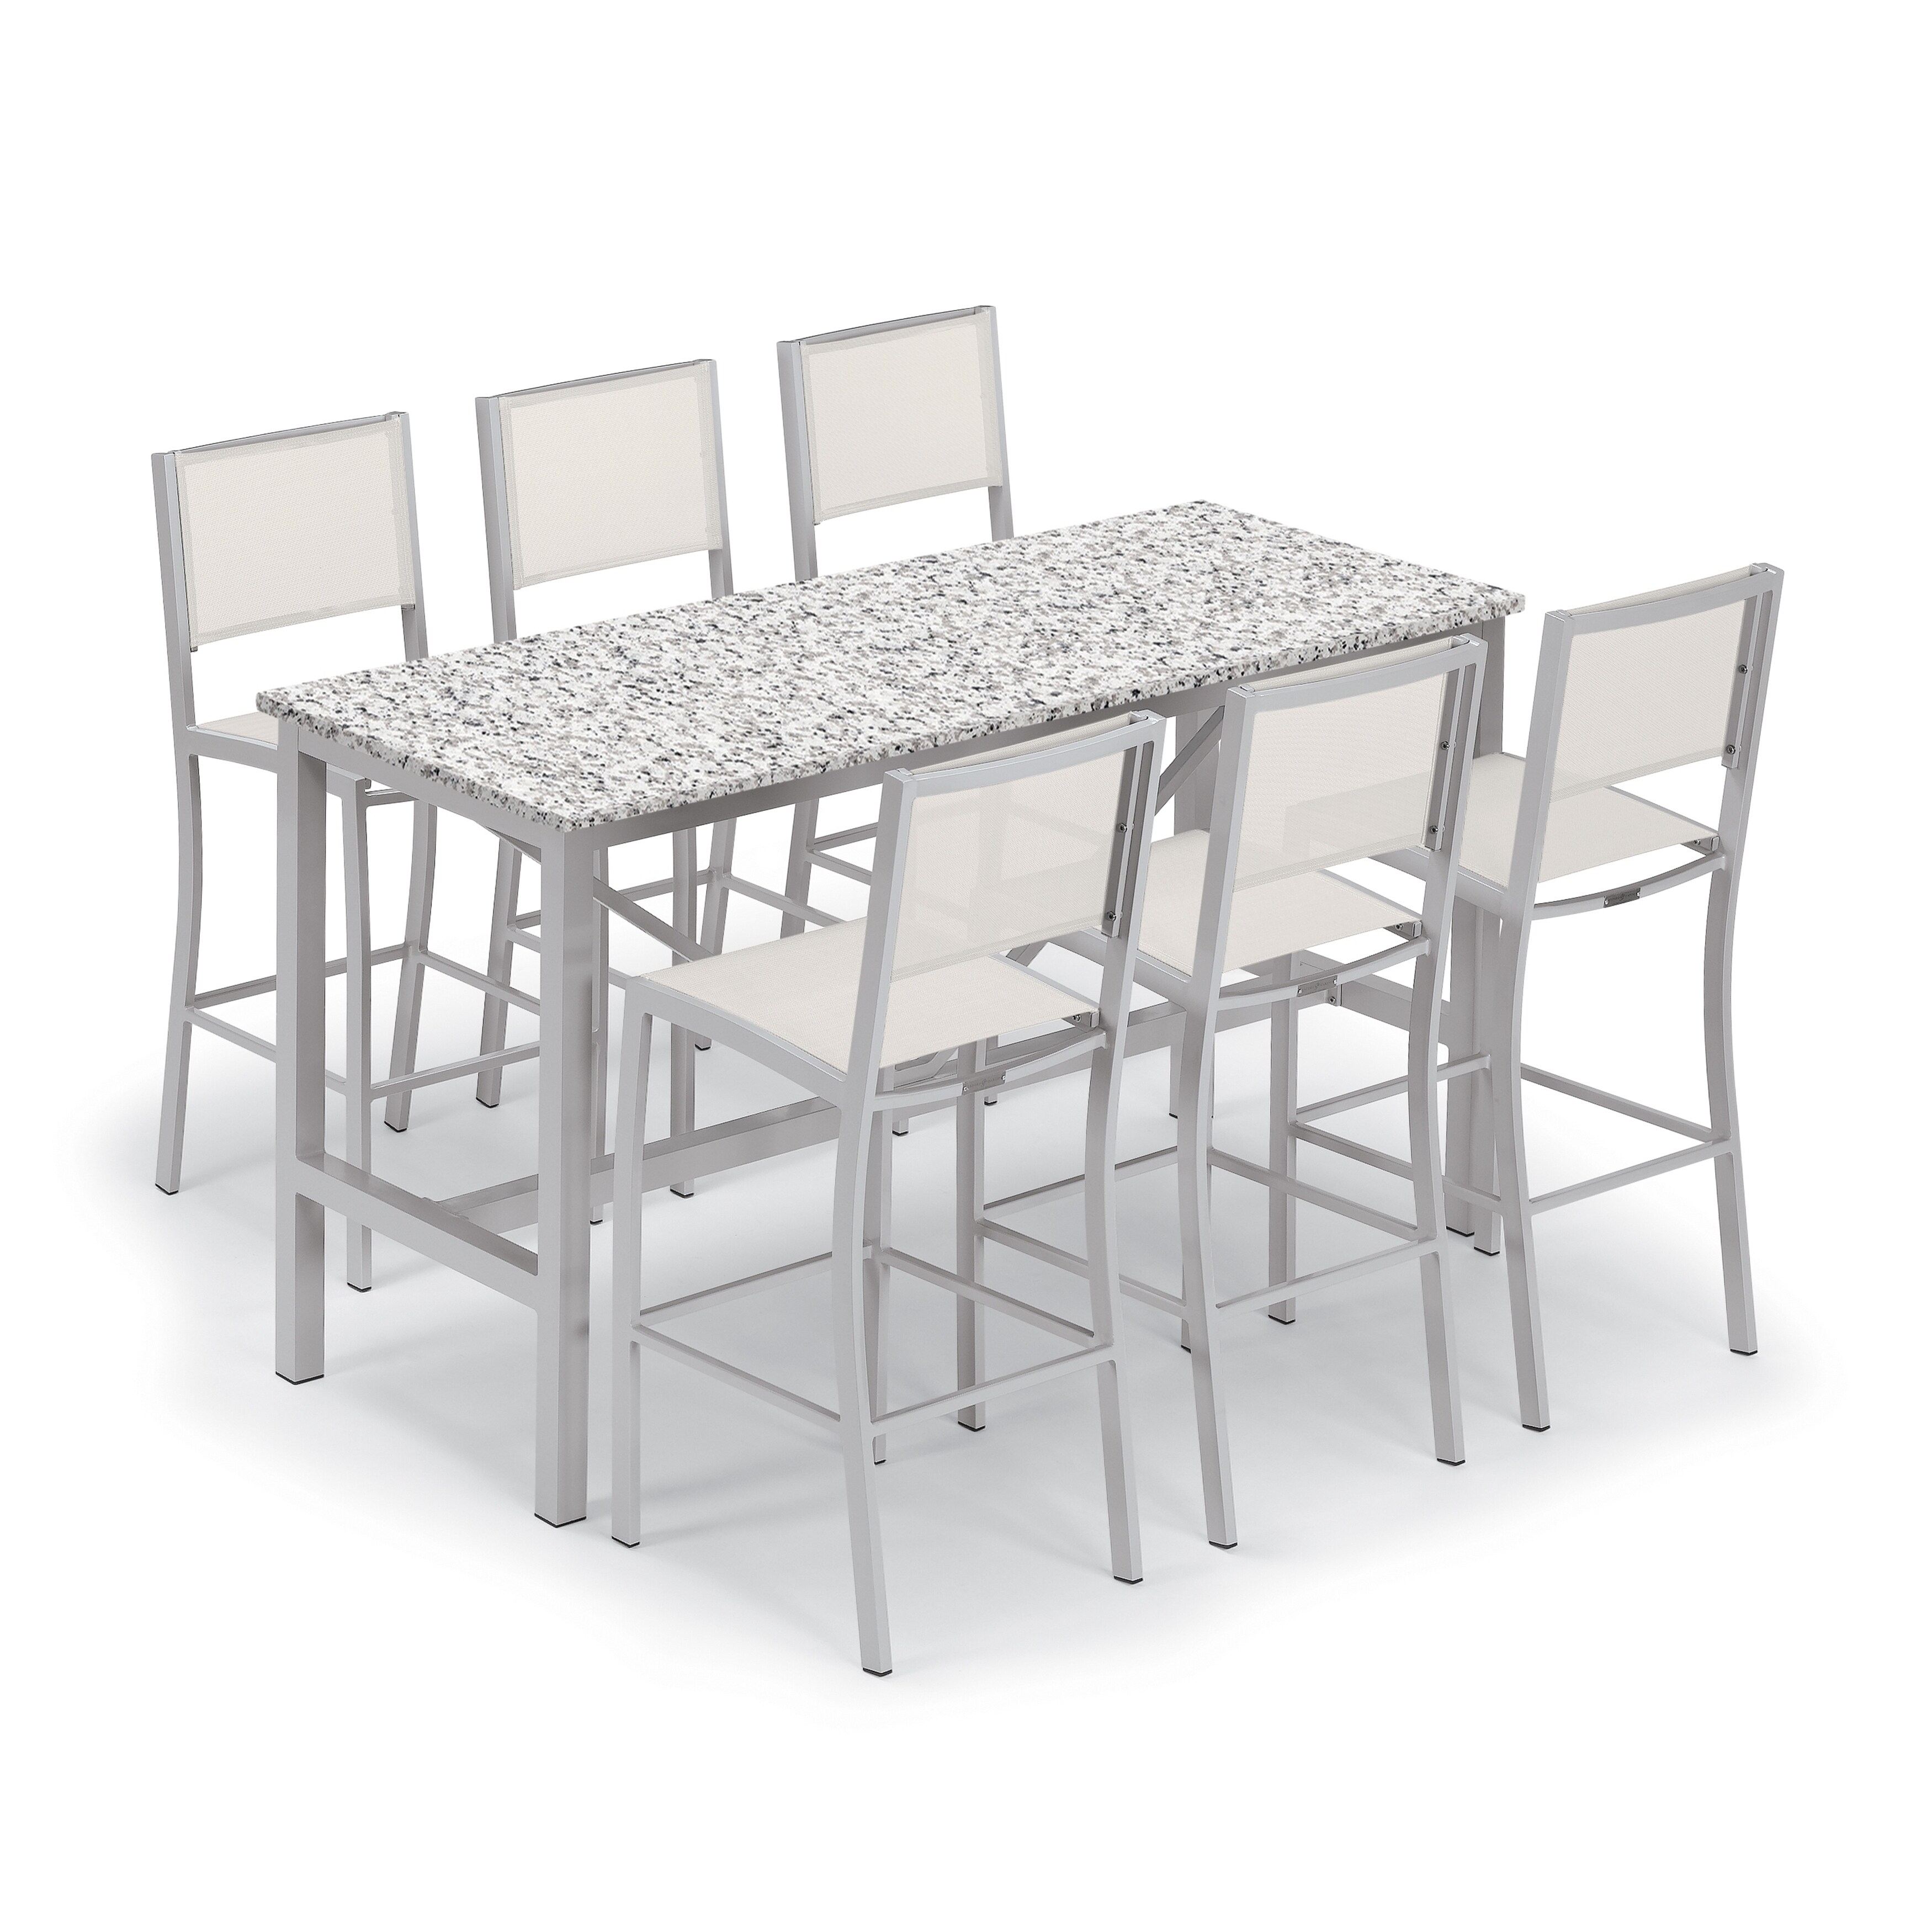 Oxford Garden Travira 7-piece 72-in X 30-in Lite-core Ash Bar Table and Sling Bar Chair Set - Natural Sling